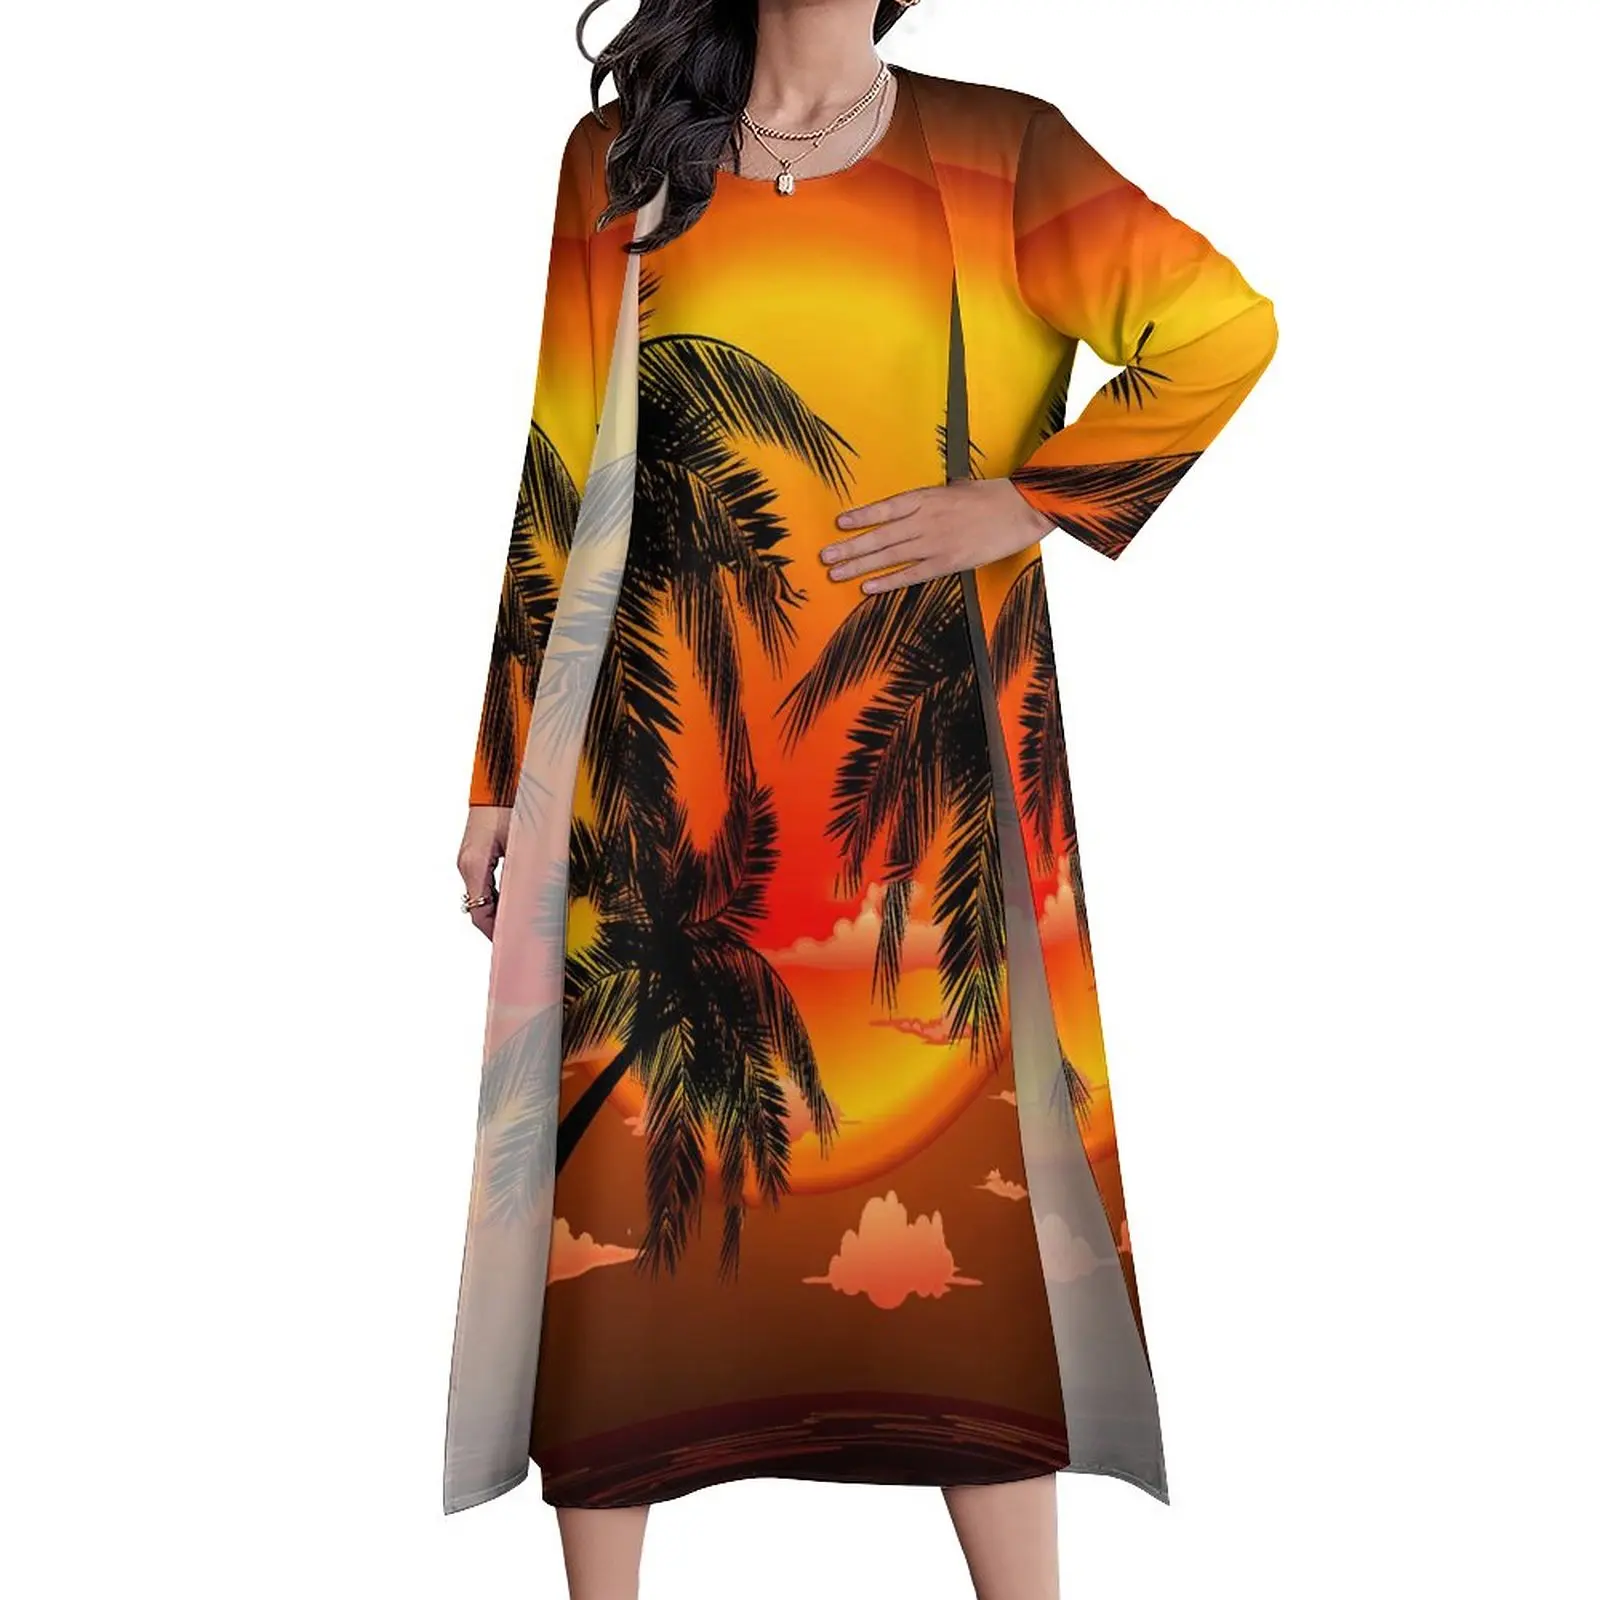 

Palm Trees Dress Long Sleeve Warm Topical Sunset Aesthetic Bohemia Long Dresses Female Party Maxi Dress Birthday Present